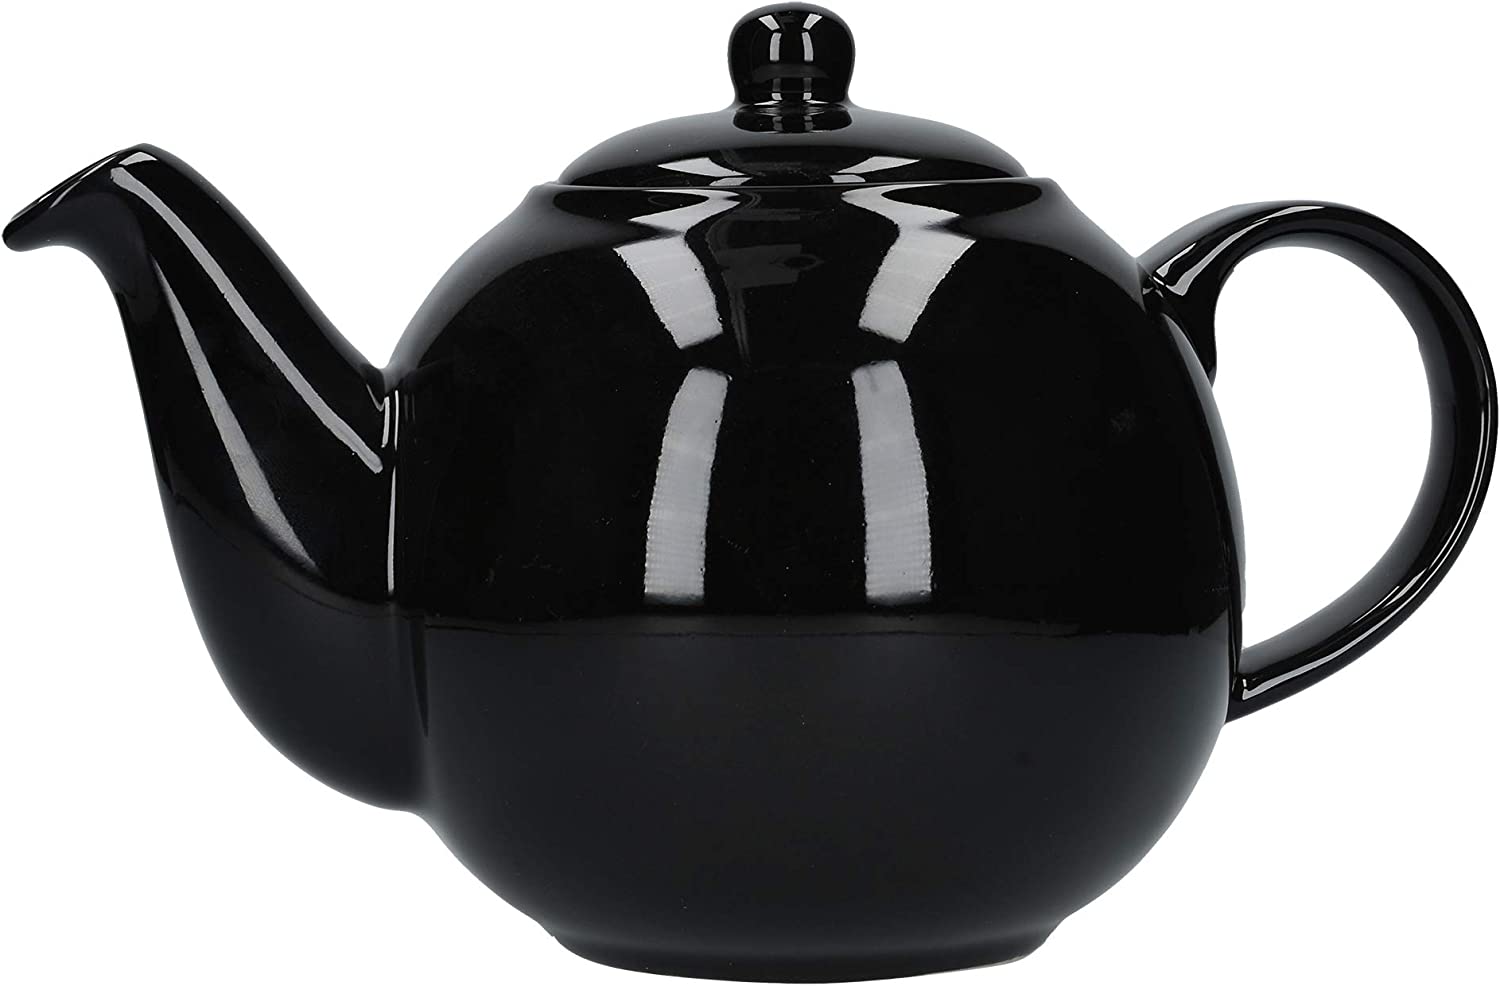 London Pottery 30185 Globe Teapot with Strainer Ceramic Gloss Black 6 Cup (1.2 Litre)